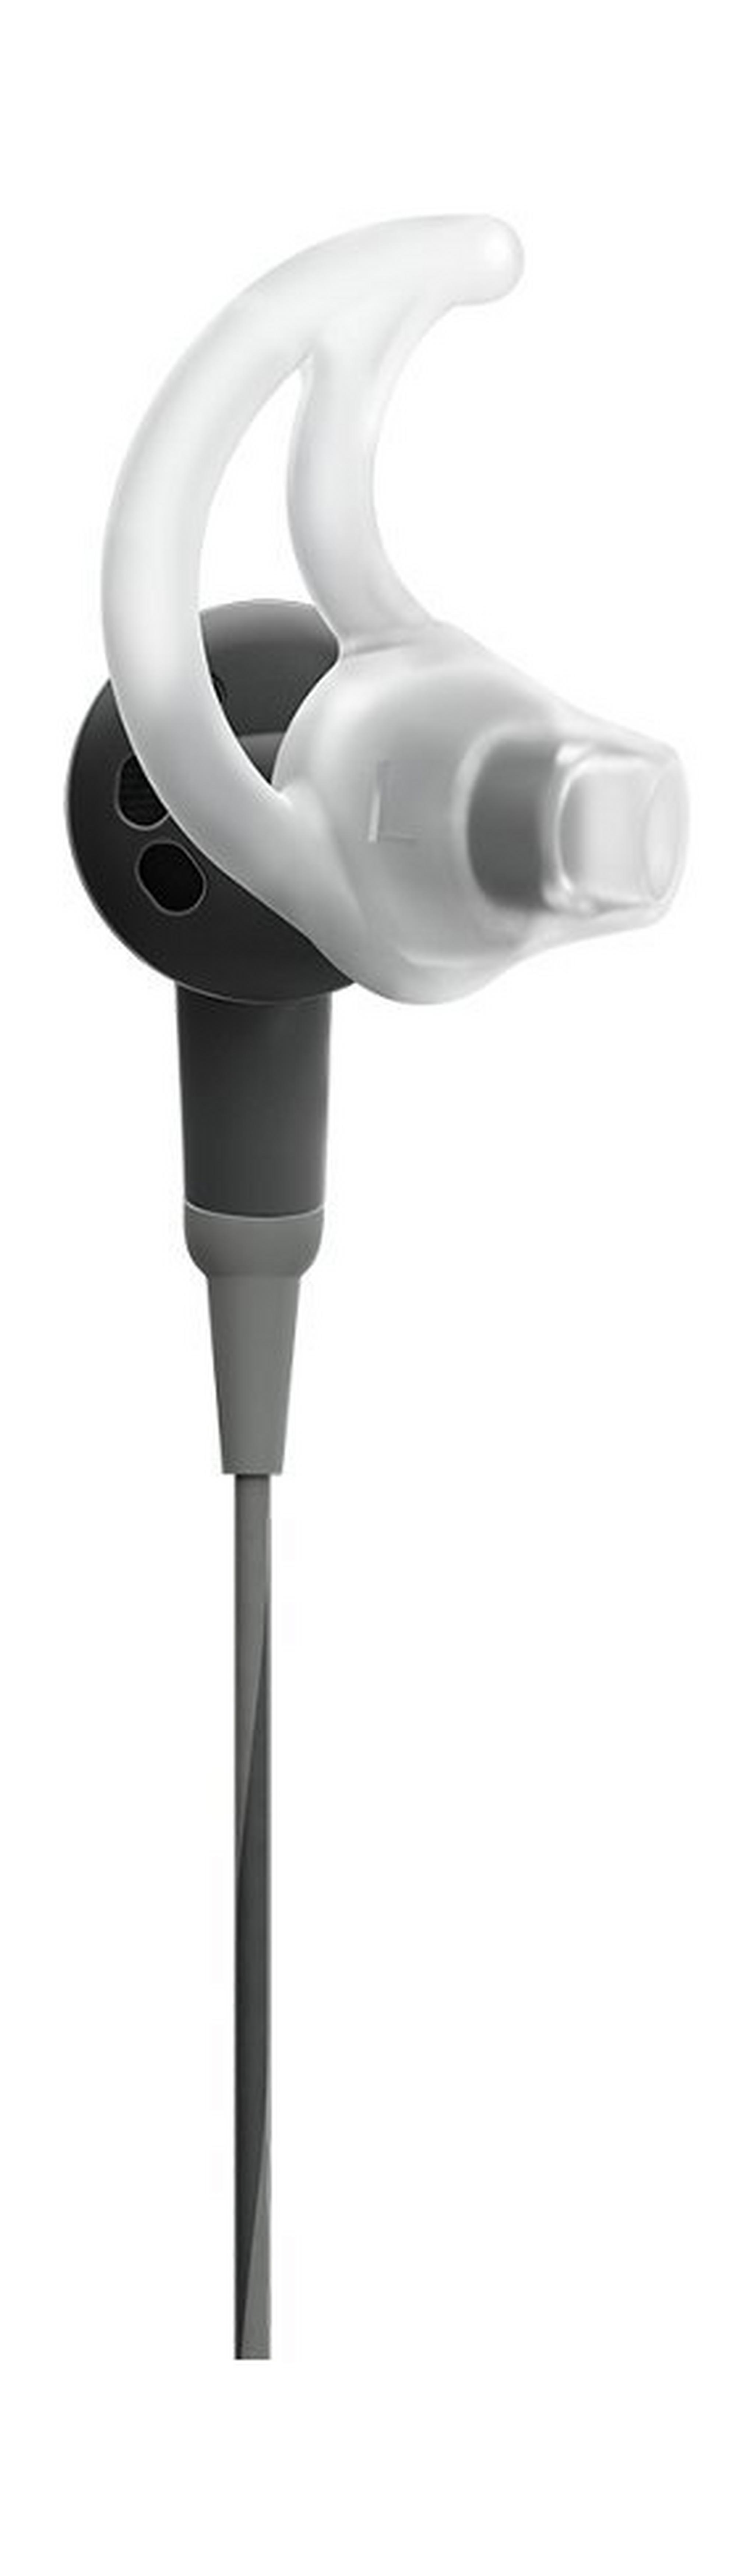 Bose SoundSport In-Ear Headphones for Android Devices - Charcoal Grey